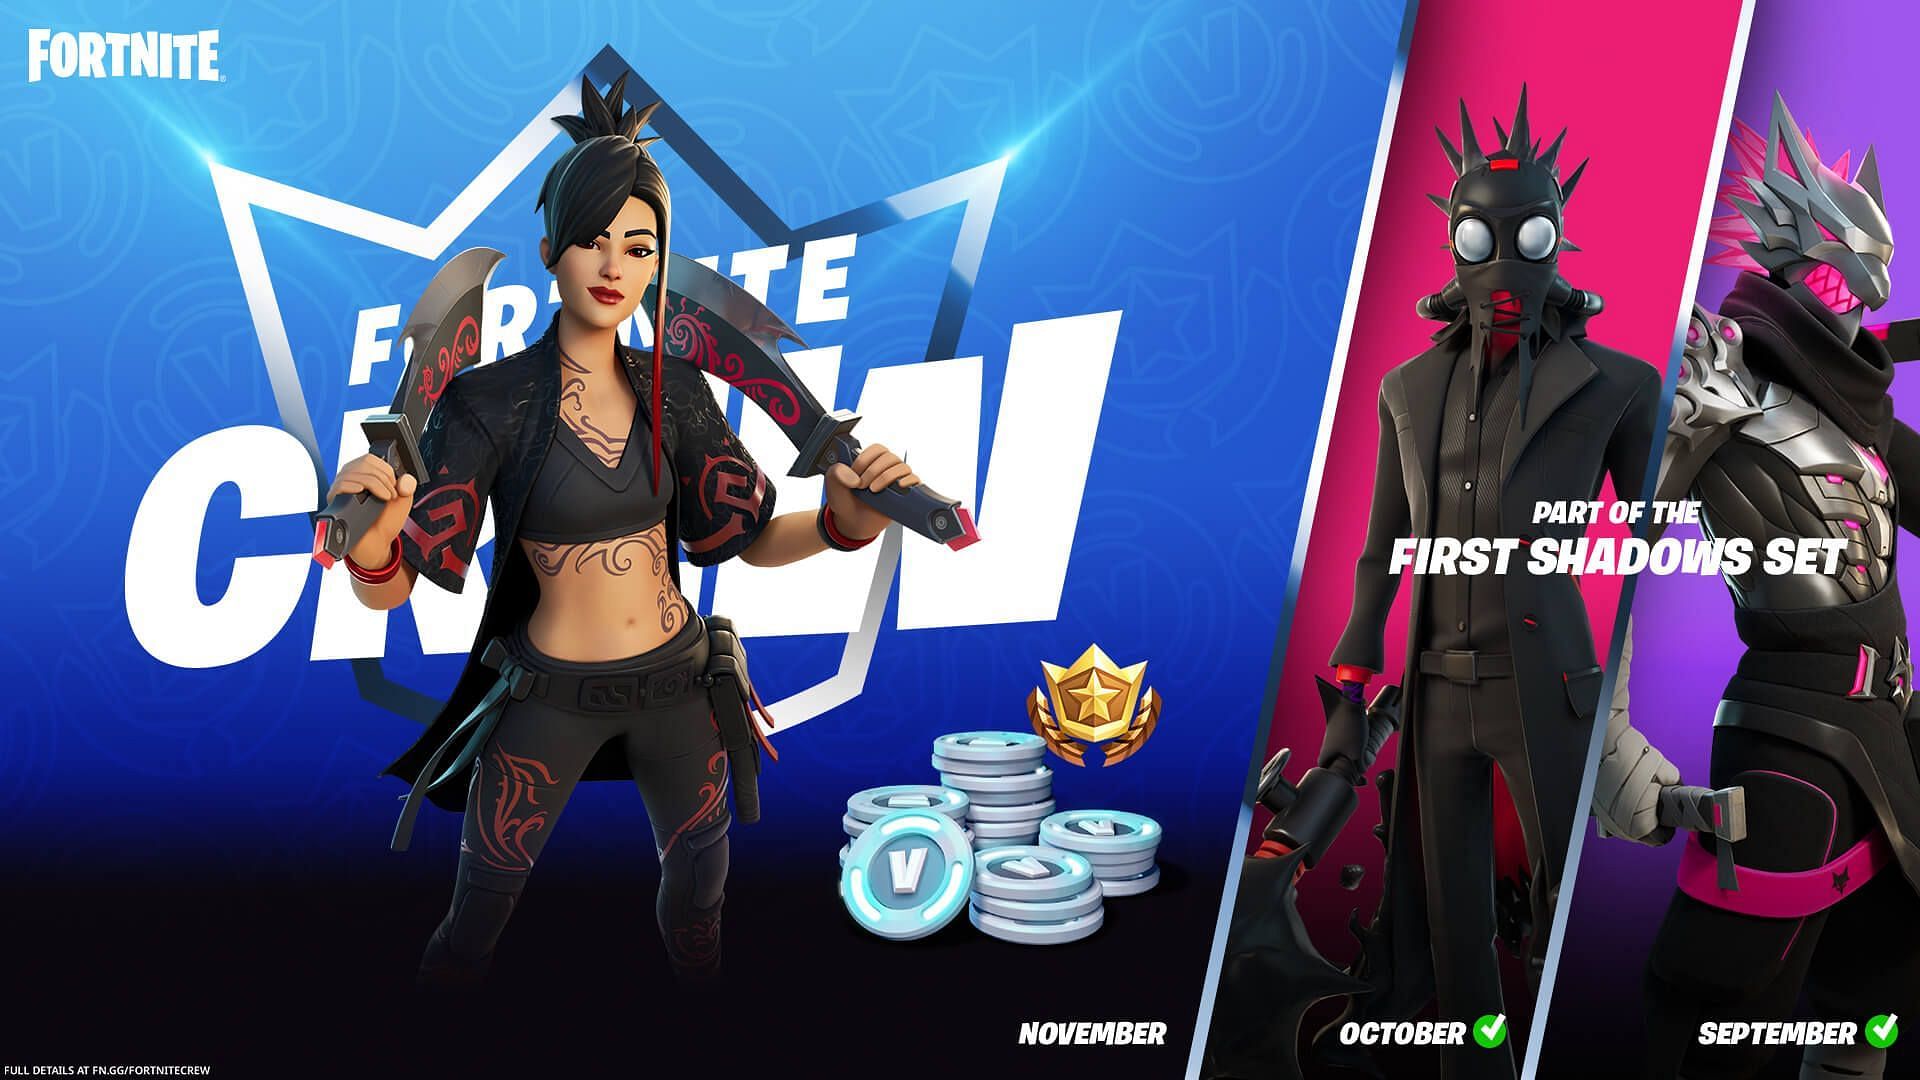 Fortnite Crew skins have become very popular. Image via Epic Games